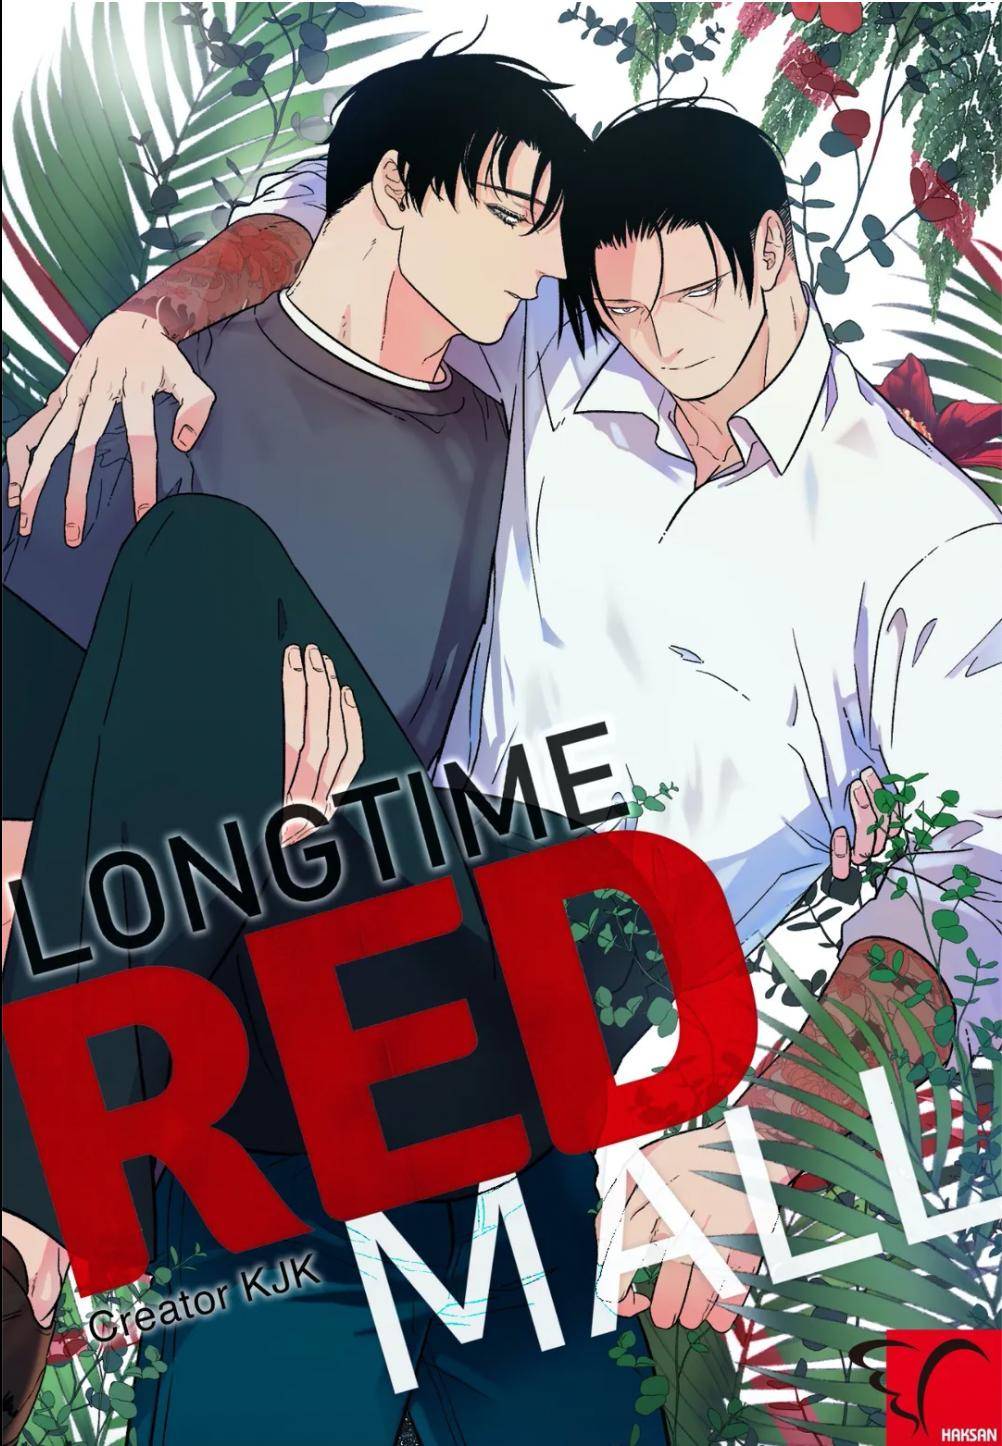 Long Time Red Mall - chapter 49 - #2